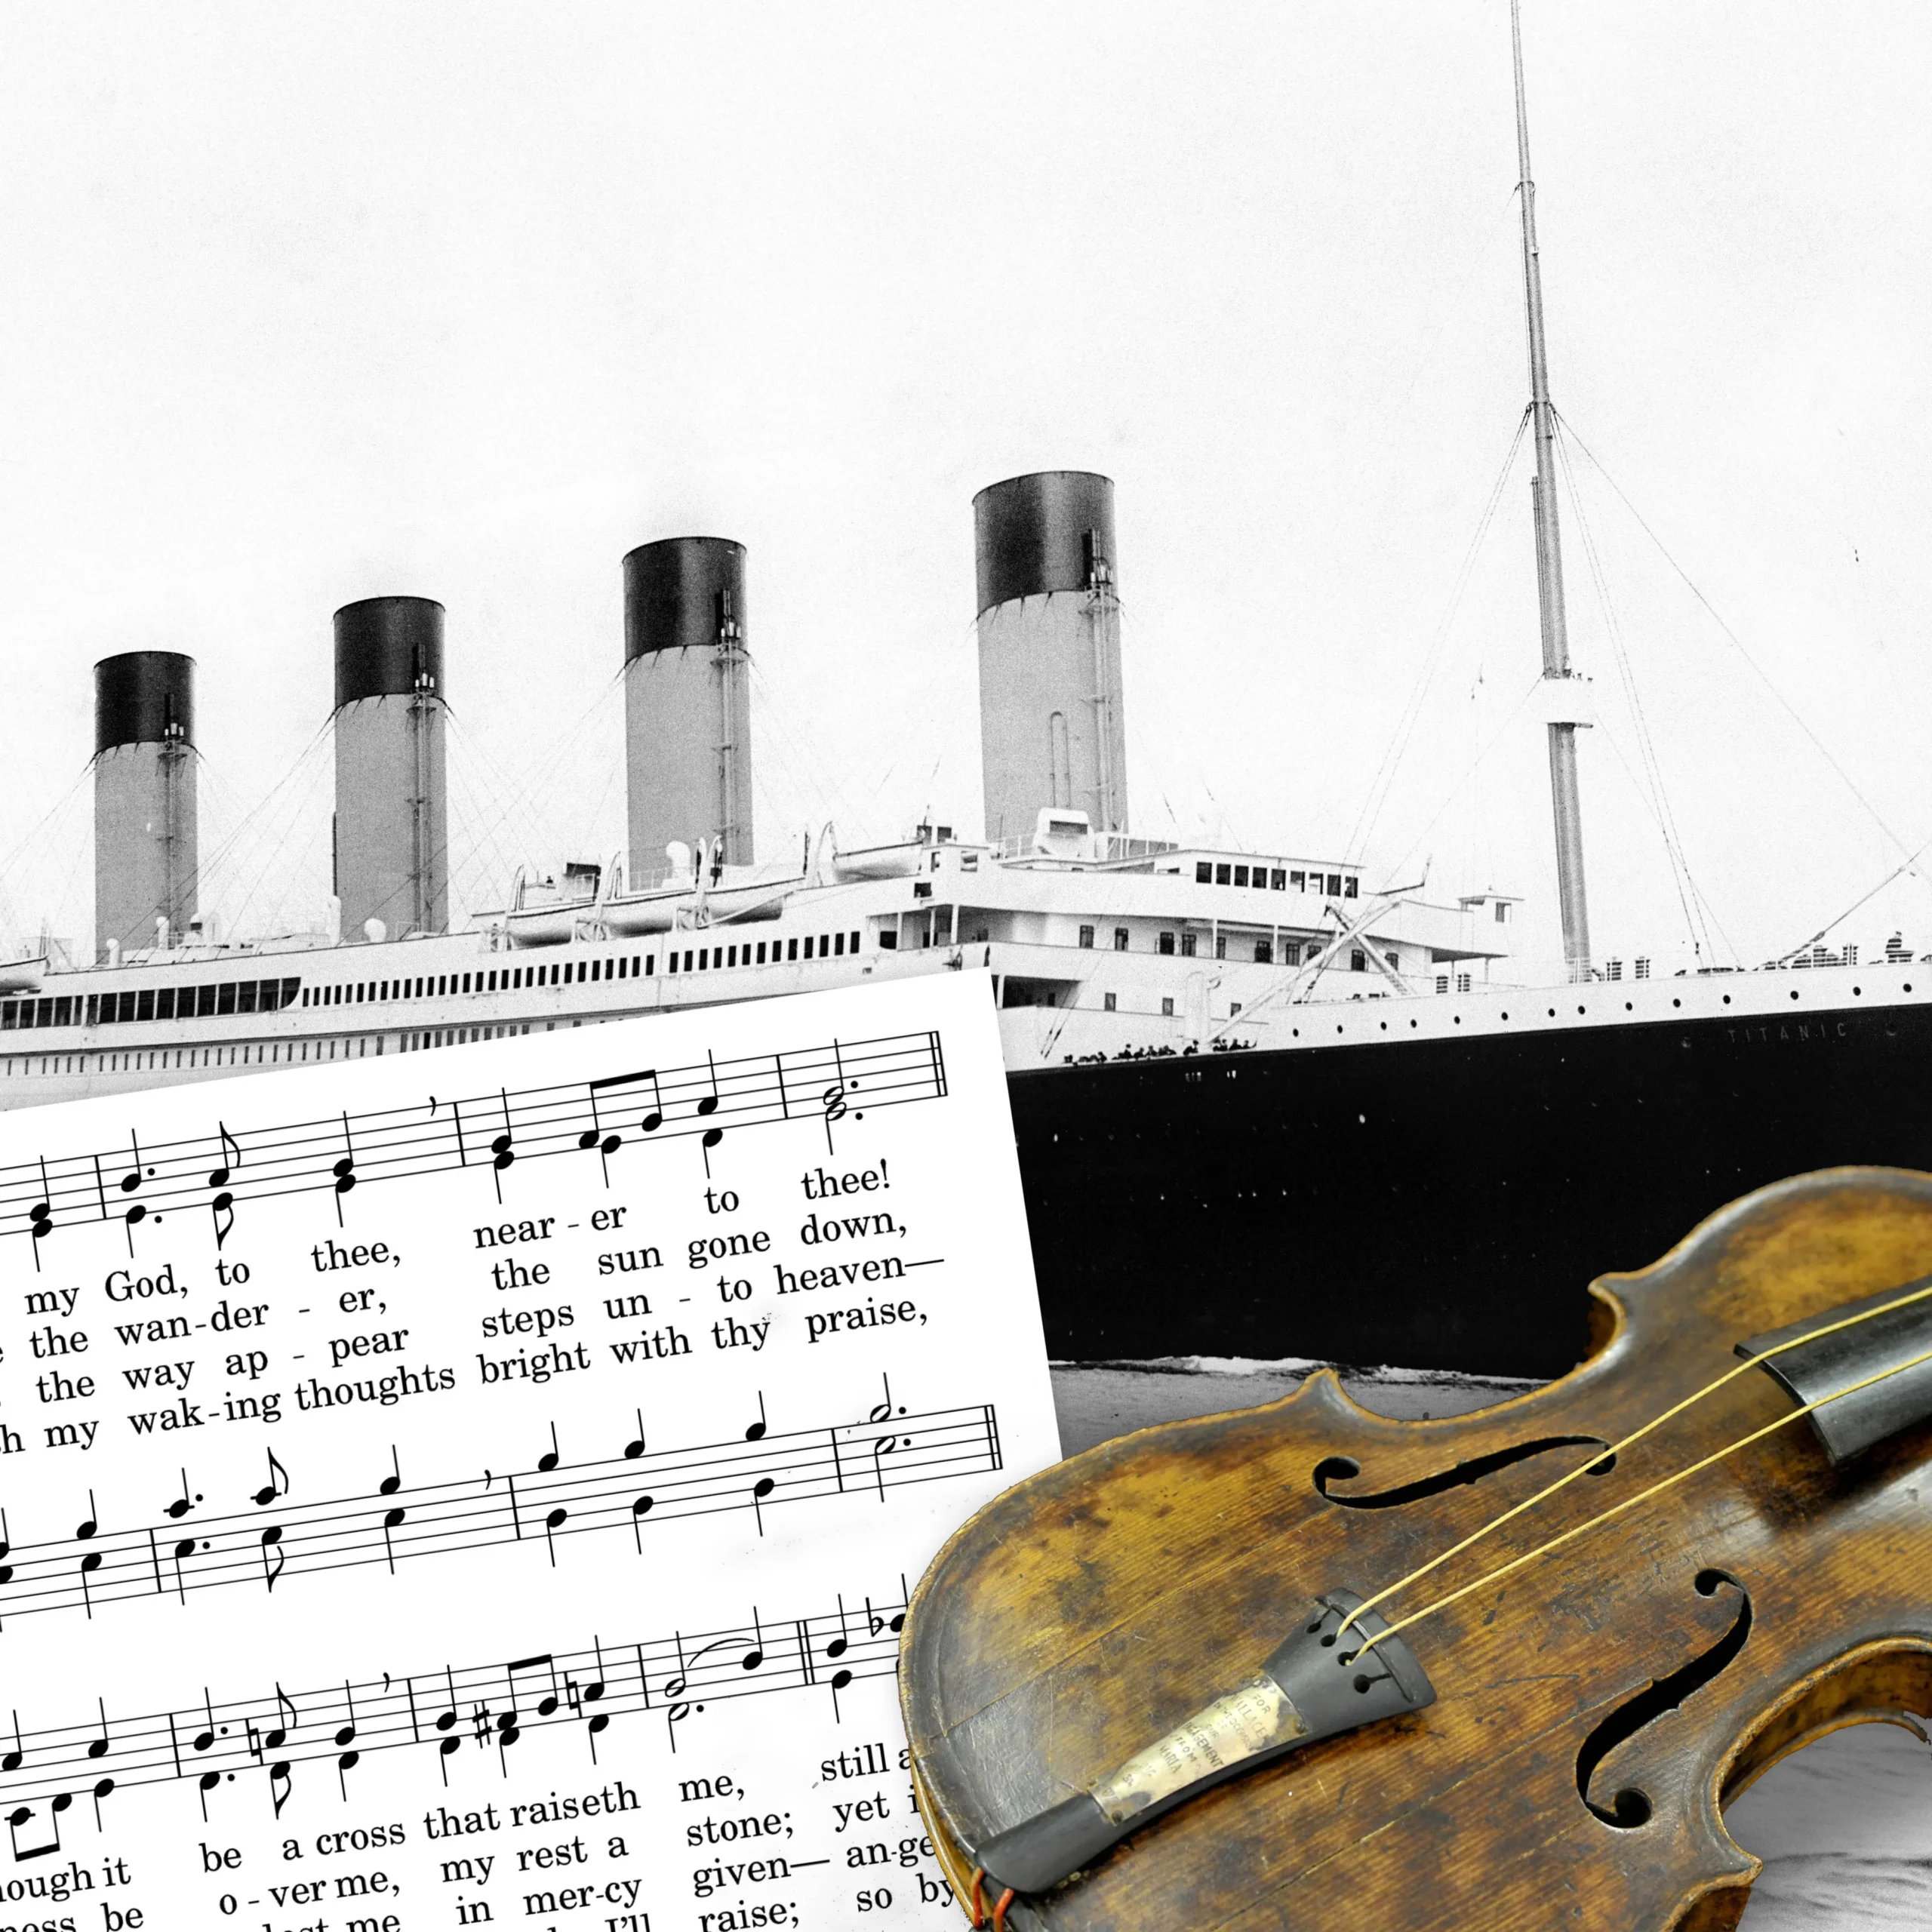 titanic last song violin - What were the last songs played on Titanic